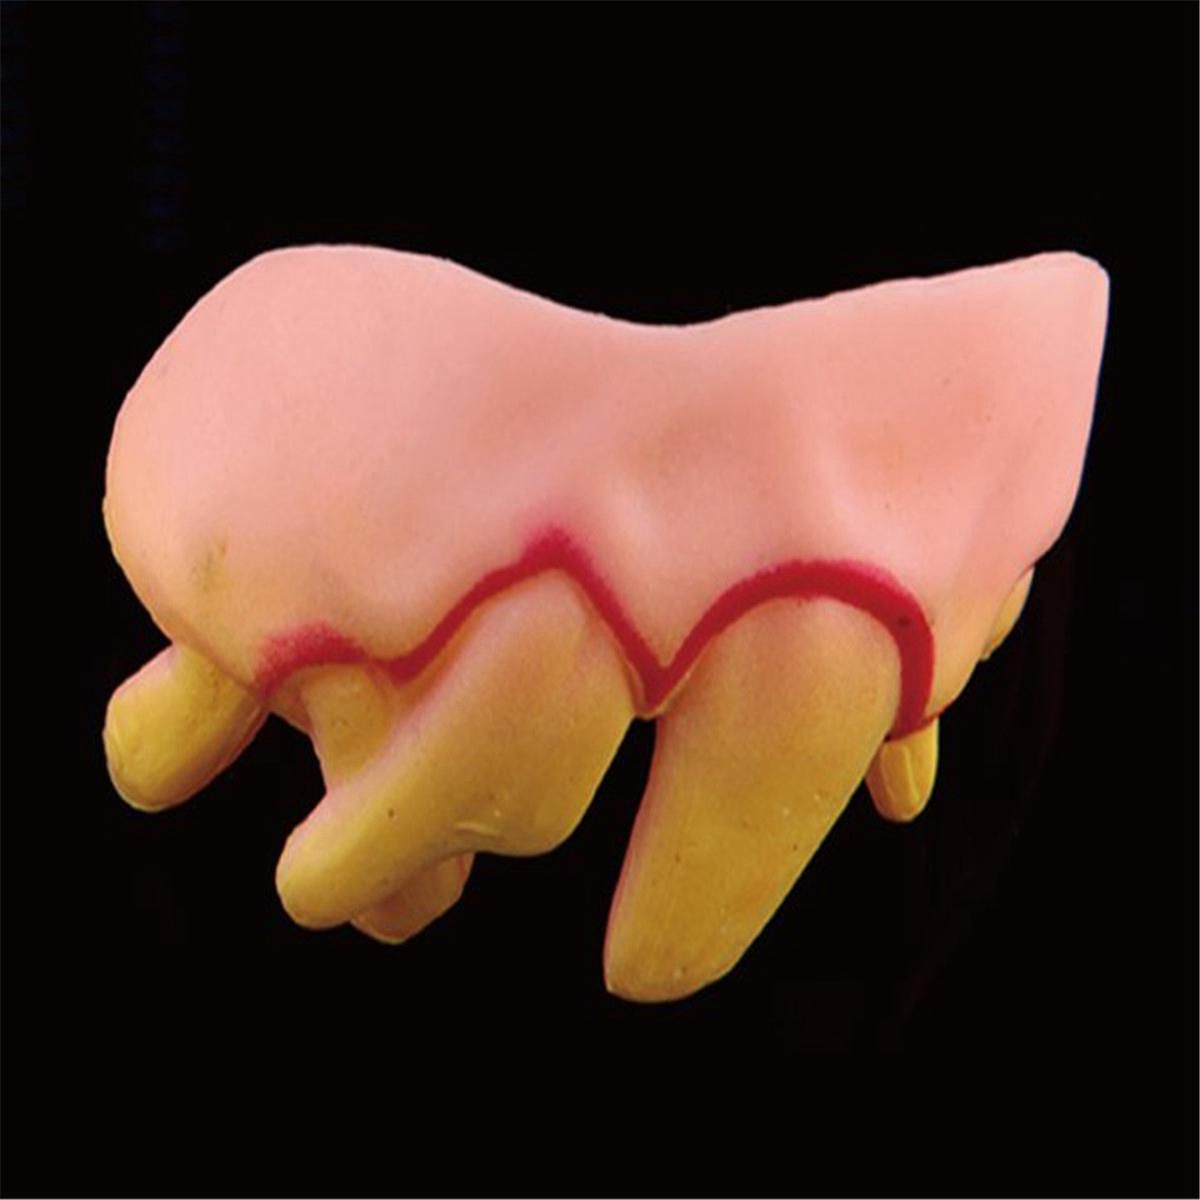 Halloween Funny Fake False Teeth Dentures Makeup Costume Masquerade Dress  Party - Buy Halloween Funny Fake False Teeth Dentures Makeup Costume  Masquerade Dress Party Online at Low Price - Snapdeal